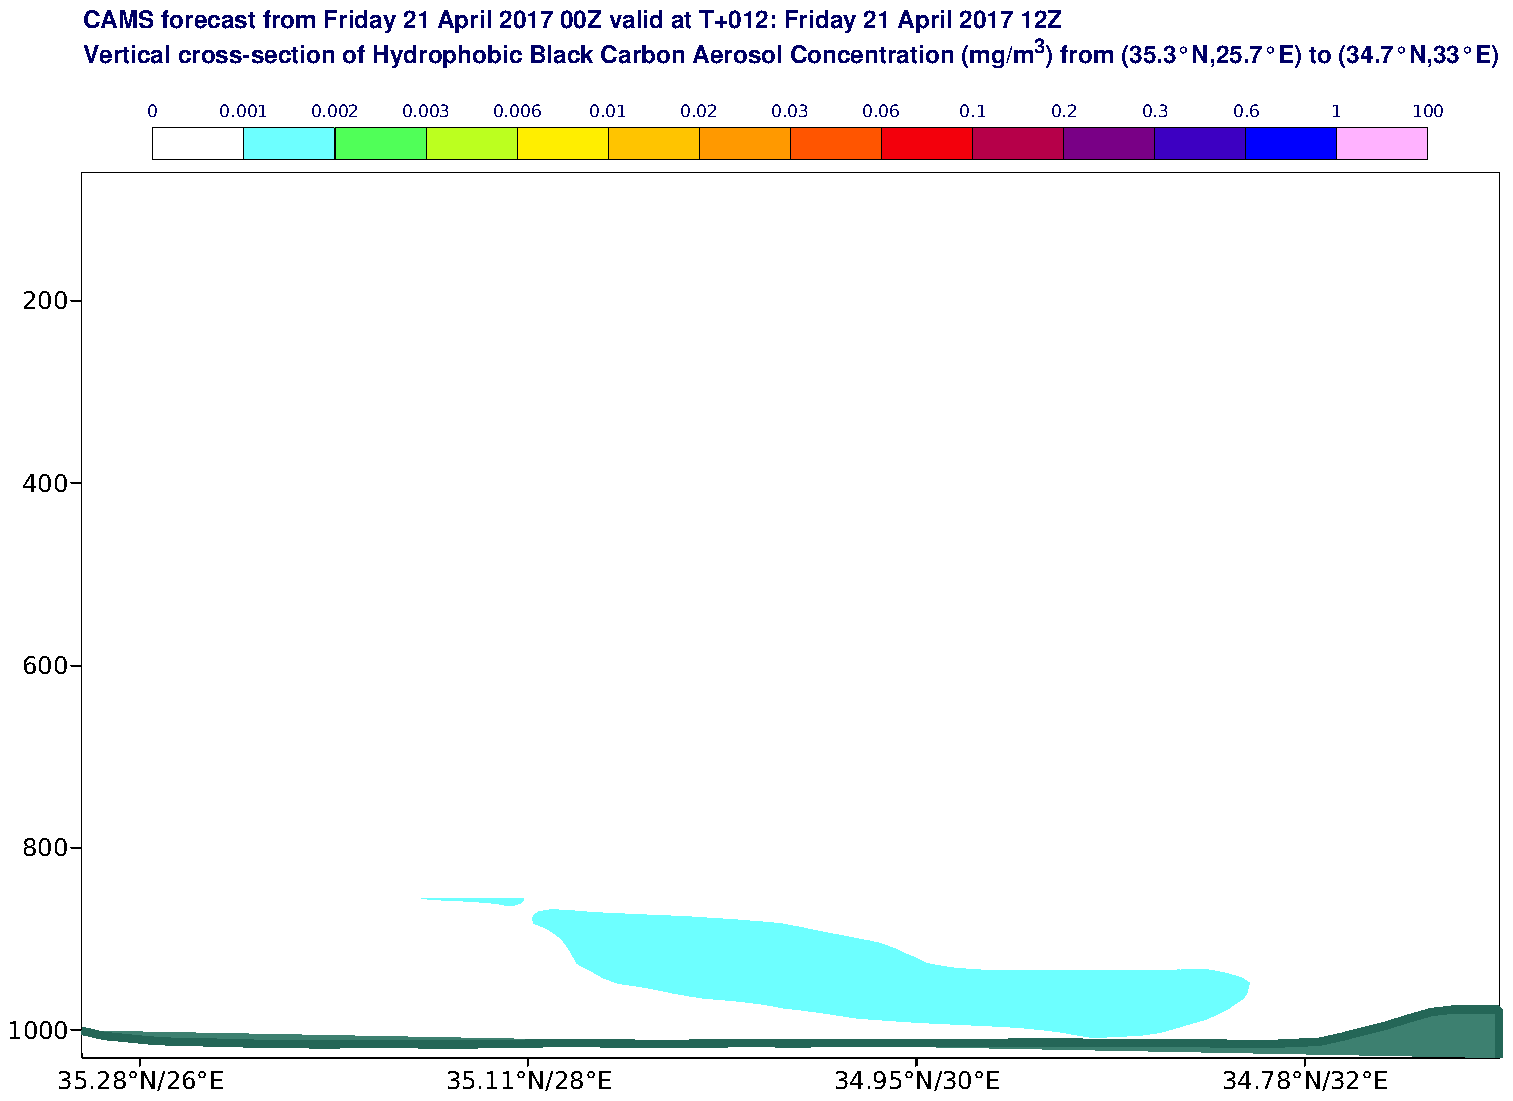 Vertical cross-section of Hydrophobic Black Carbon Aerosol Concentration (mg/m3) valid at T12 - 2017-04-21 12:00